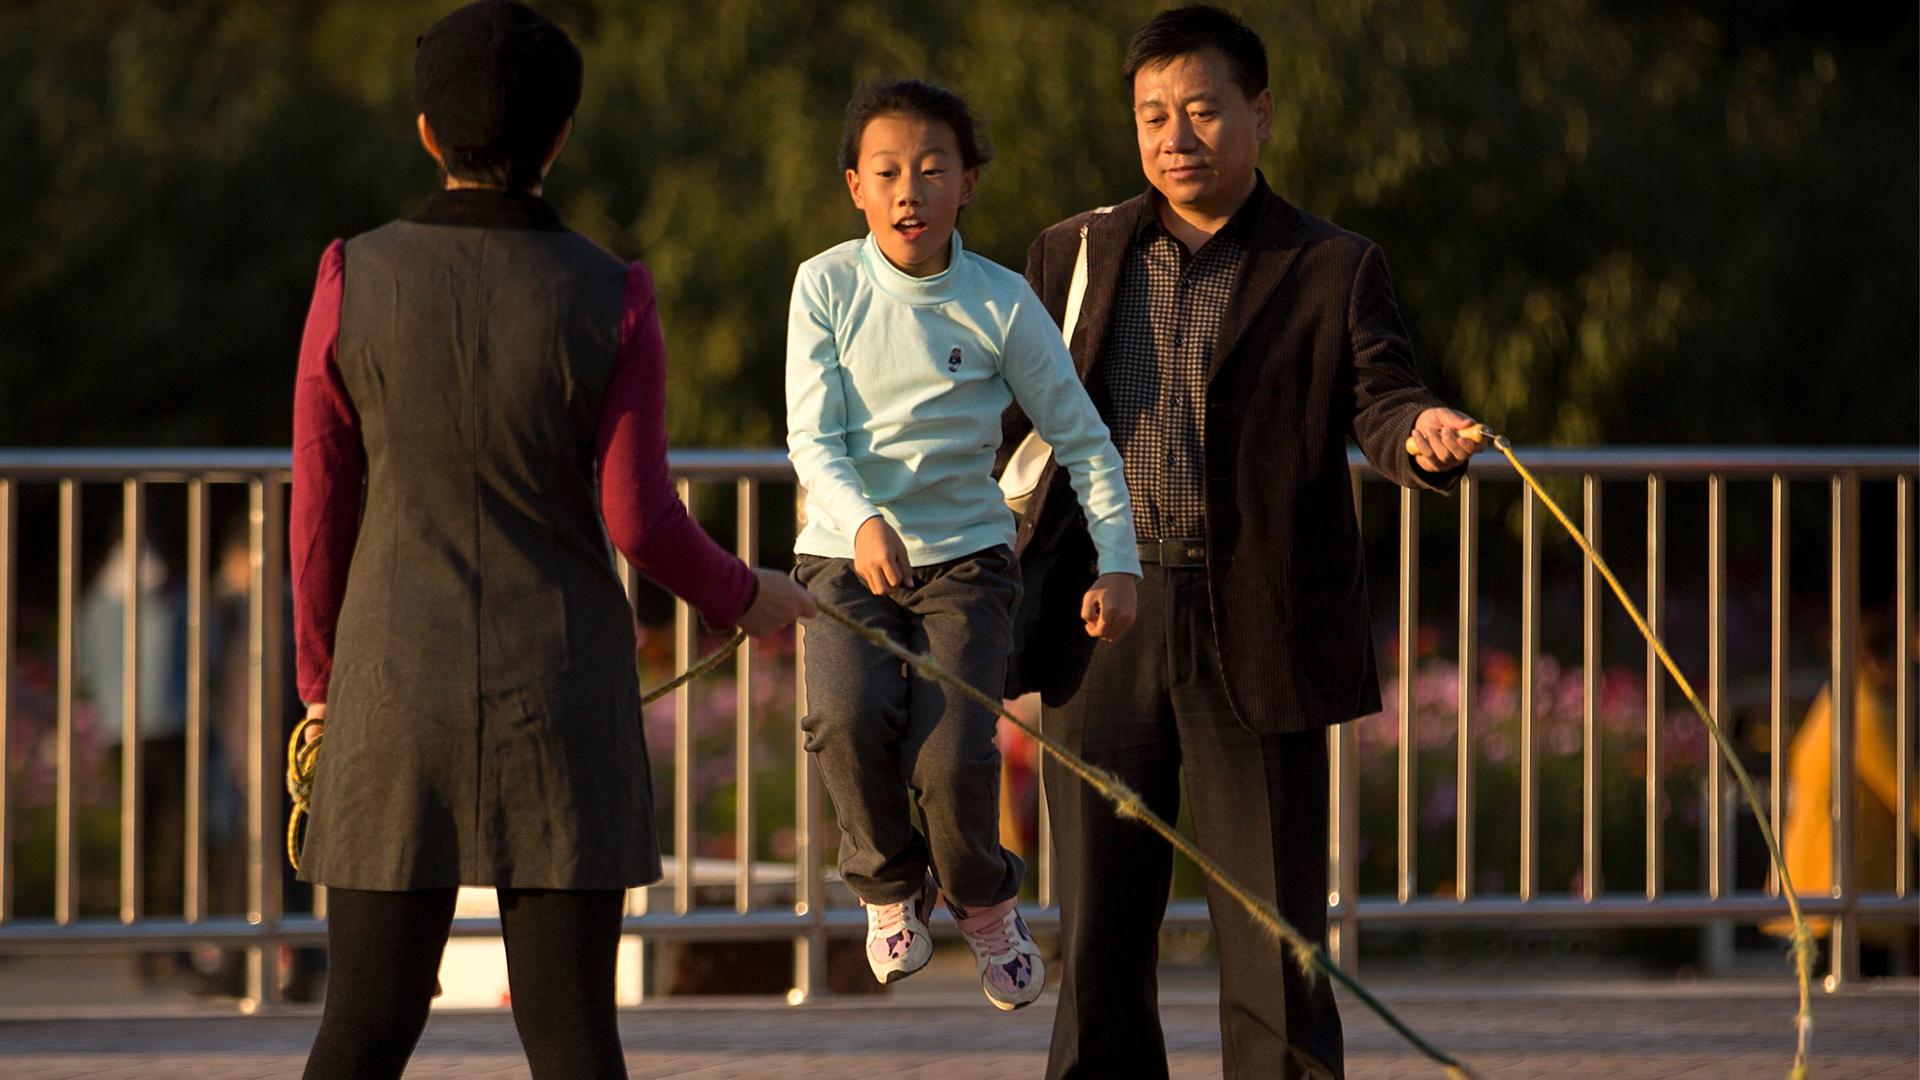 A man and woman twirl a jump rope for a girl at a park in Beijing